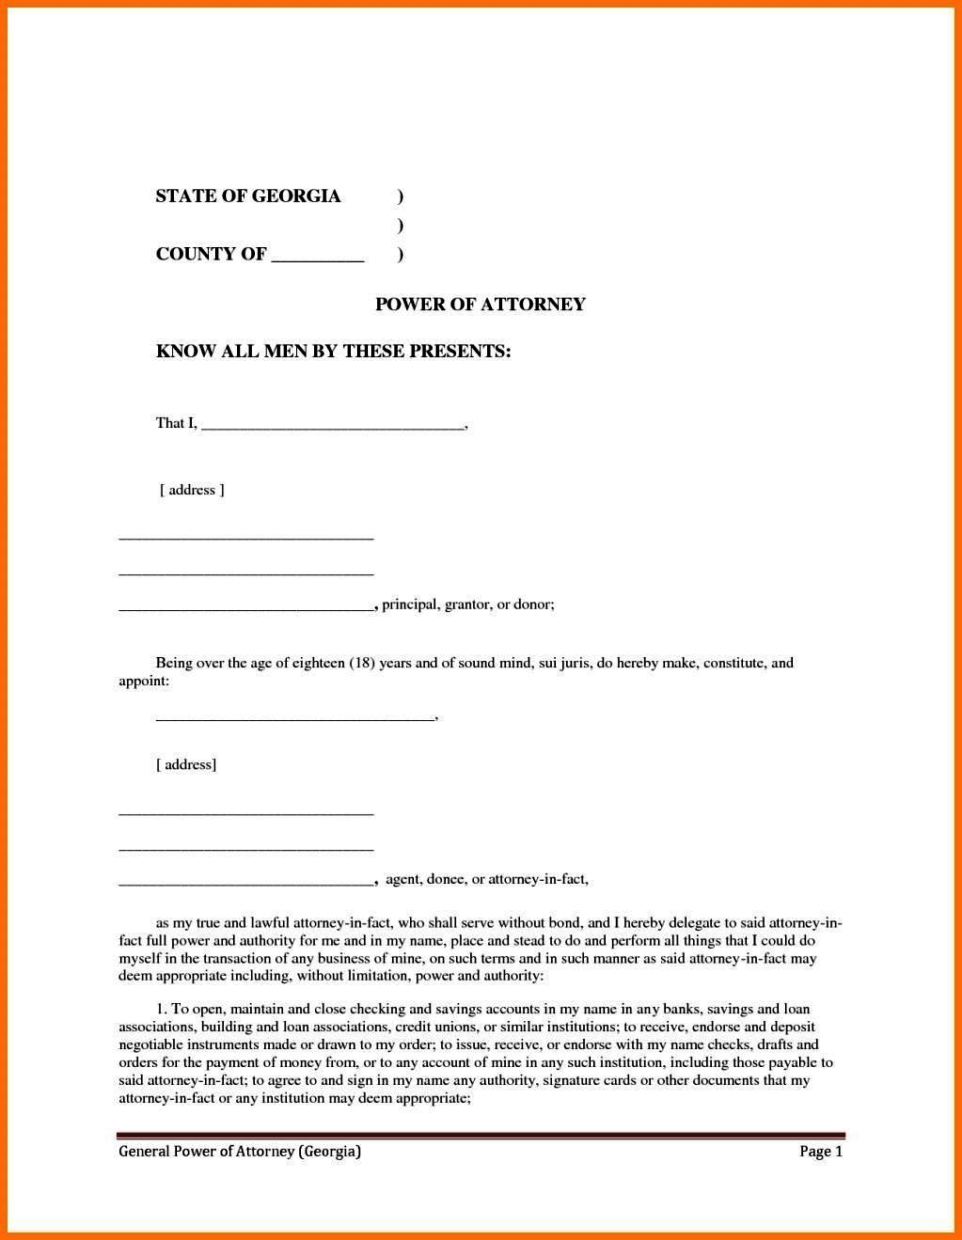 power-of-attorney-form-free-printable-pdf-printable-forms-free-online